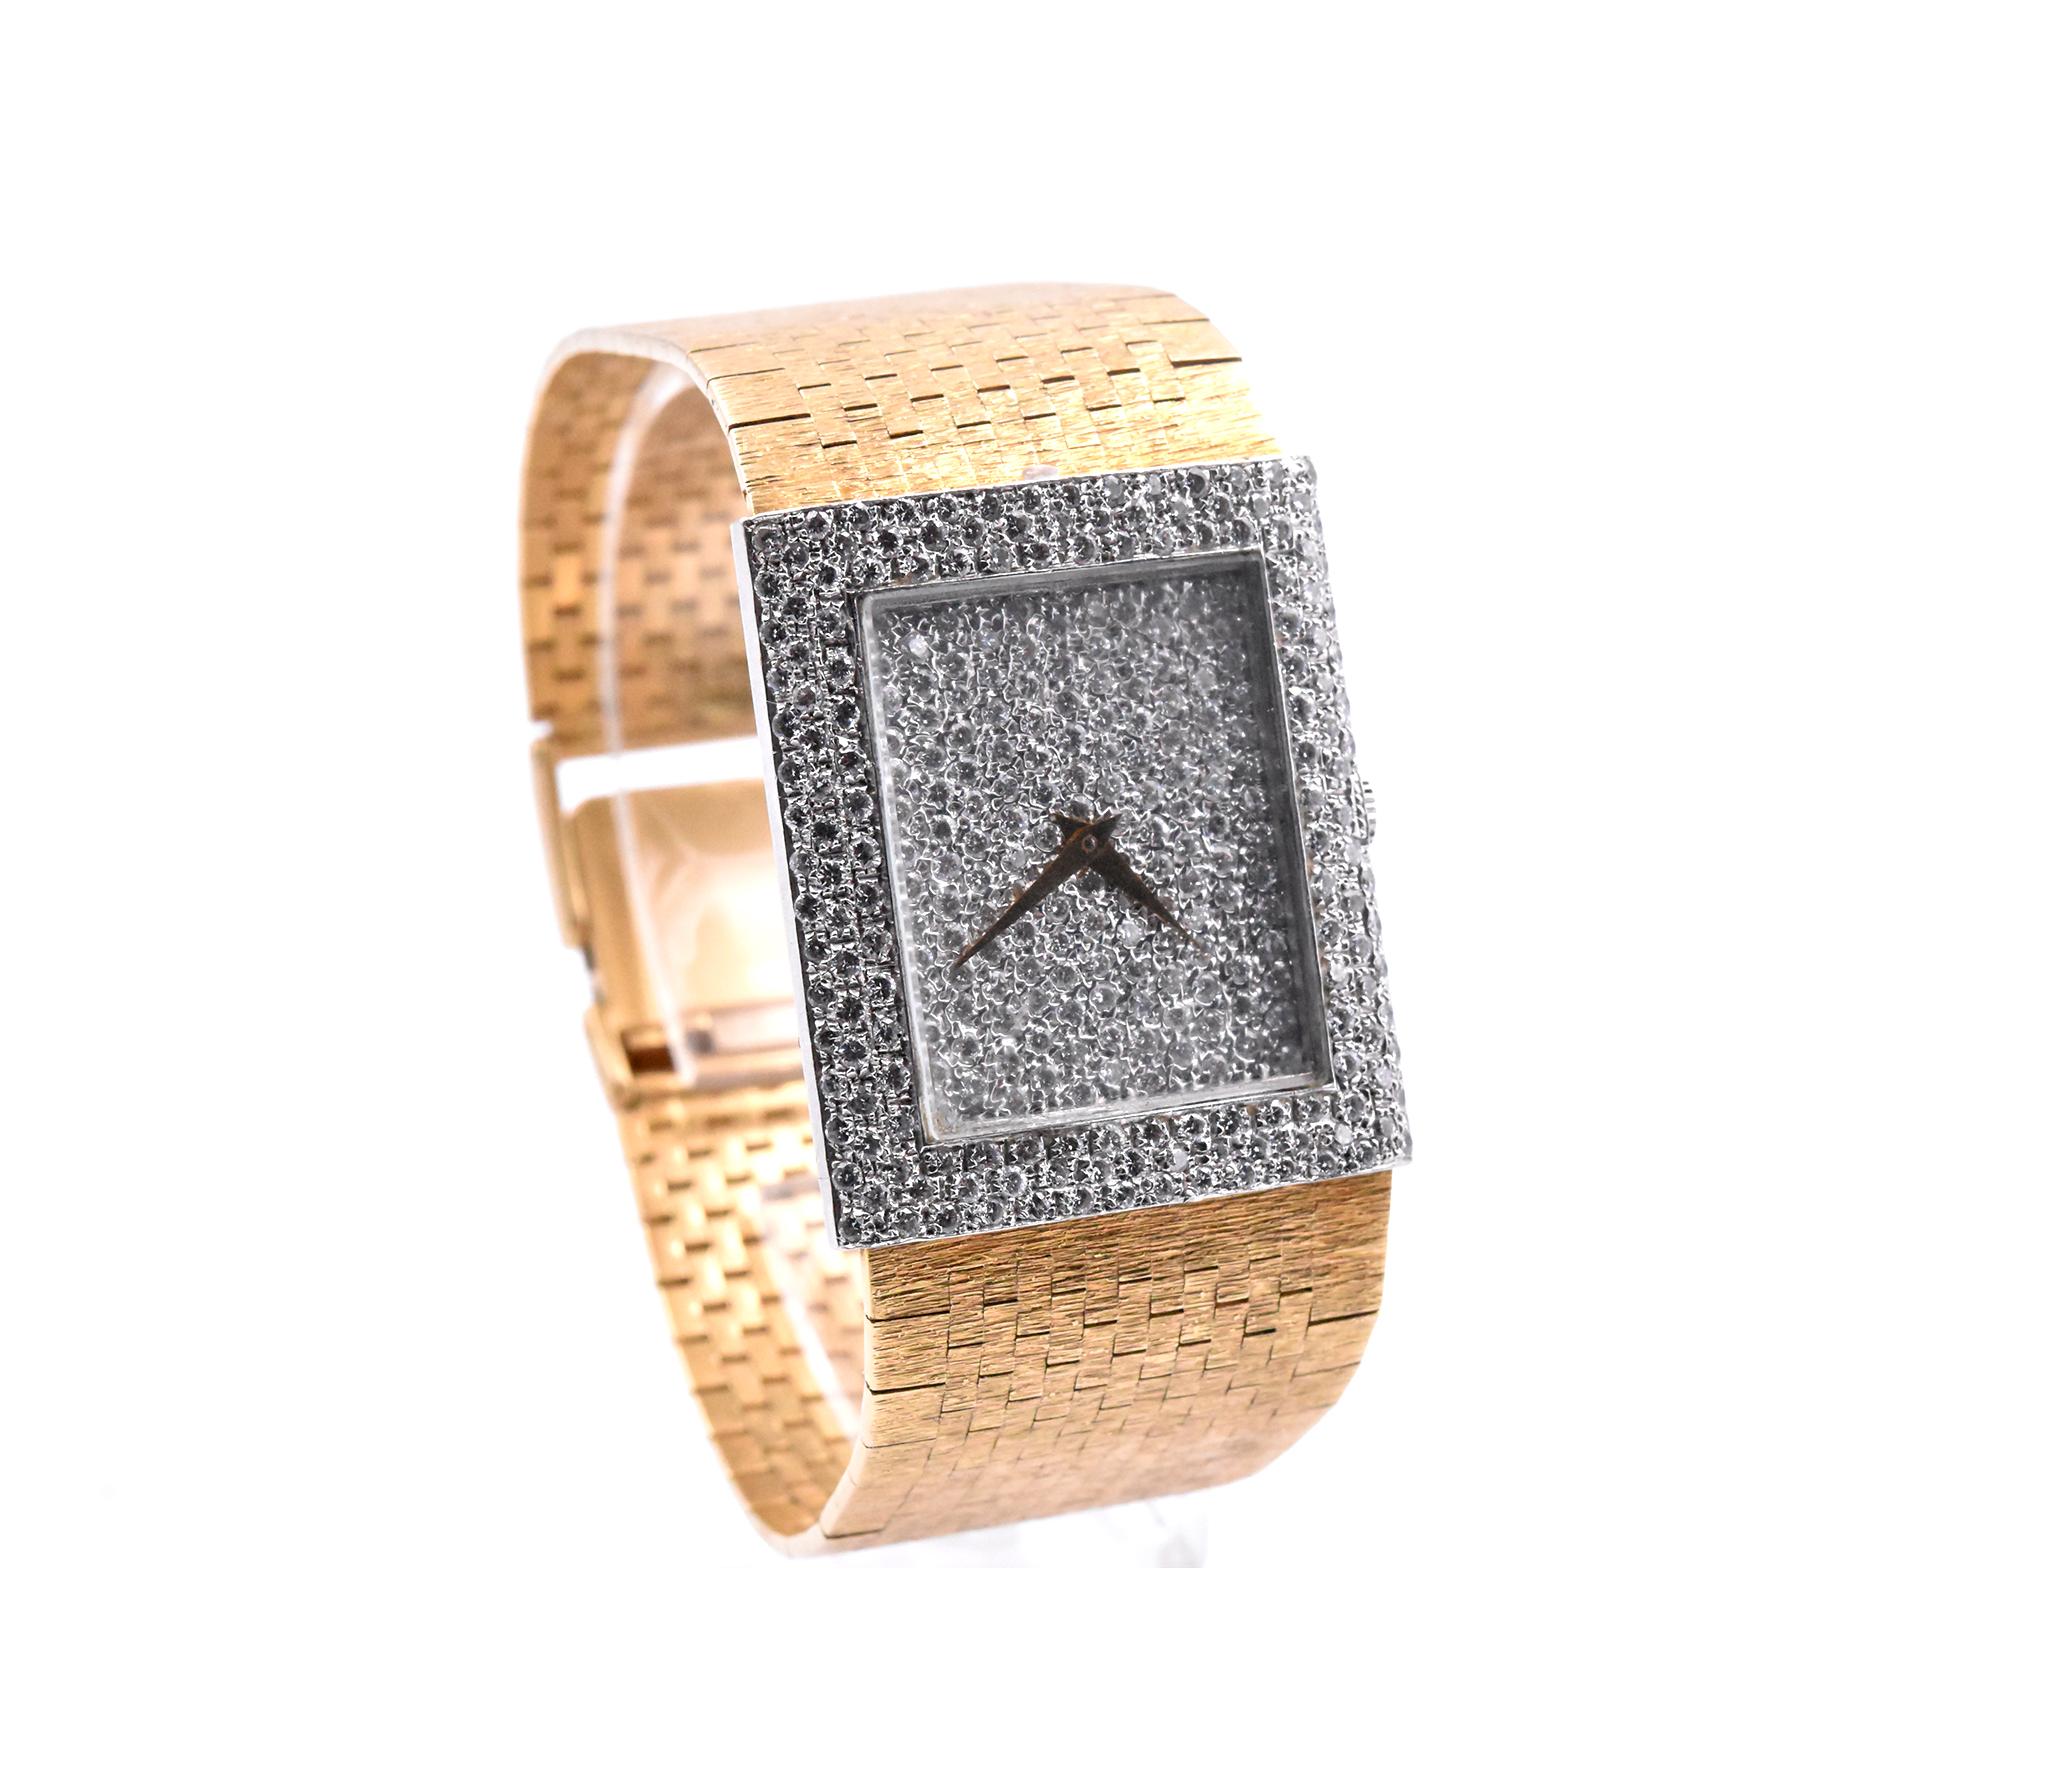 Movement: quartz
Function: hours, minutes
Case: 28mm x 33mm white gold case, diamond bezel, mineral protective crystal, push/pull crown
Band: 18k yellow gold woven mesh band with adjustable locking clasp
Dial: pave diamond dial with no numerals or